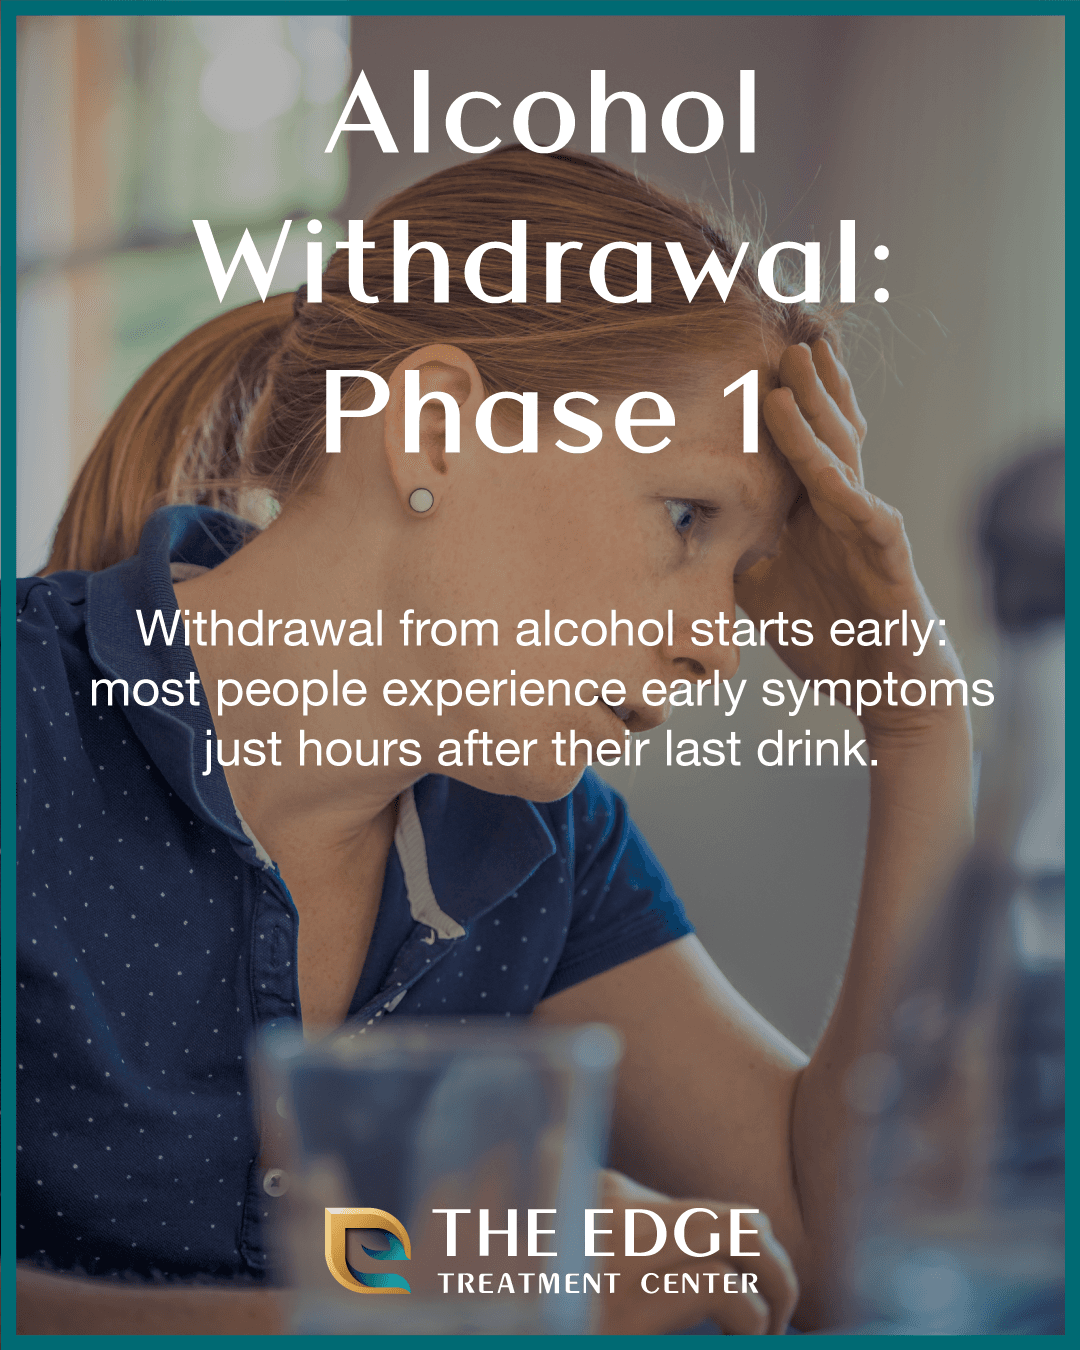 Phase 1 of Alcohol Withdrawal